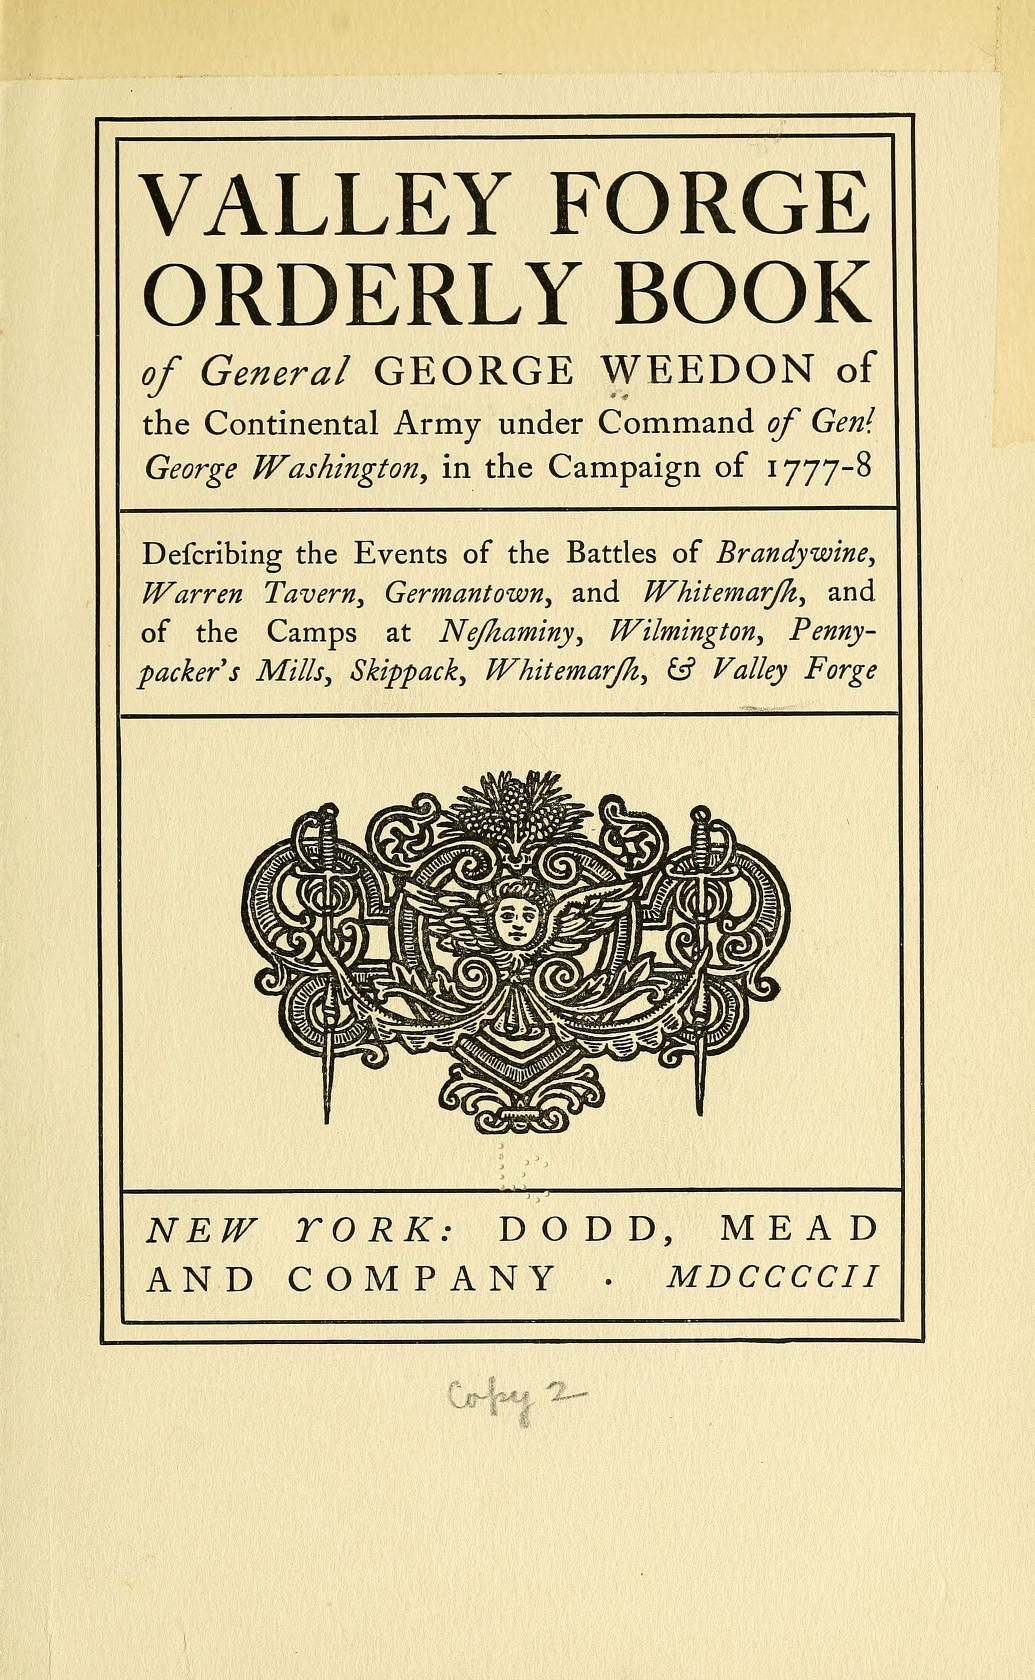 Valley Forge orderly book of General George Weedon of the Continental Army under command of Genl. George Washington, in the campaign of 1777-8, describing the events of the Battles of Brandywine, Warren Tavern, Germantown, and Whitemarsh, and of the camps at Neshaminy, Wilmington, Pennypacker's Mills, Skippack, Whitemarsh, & Valley Forge.